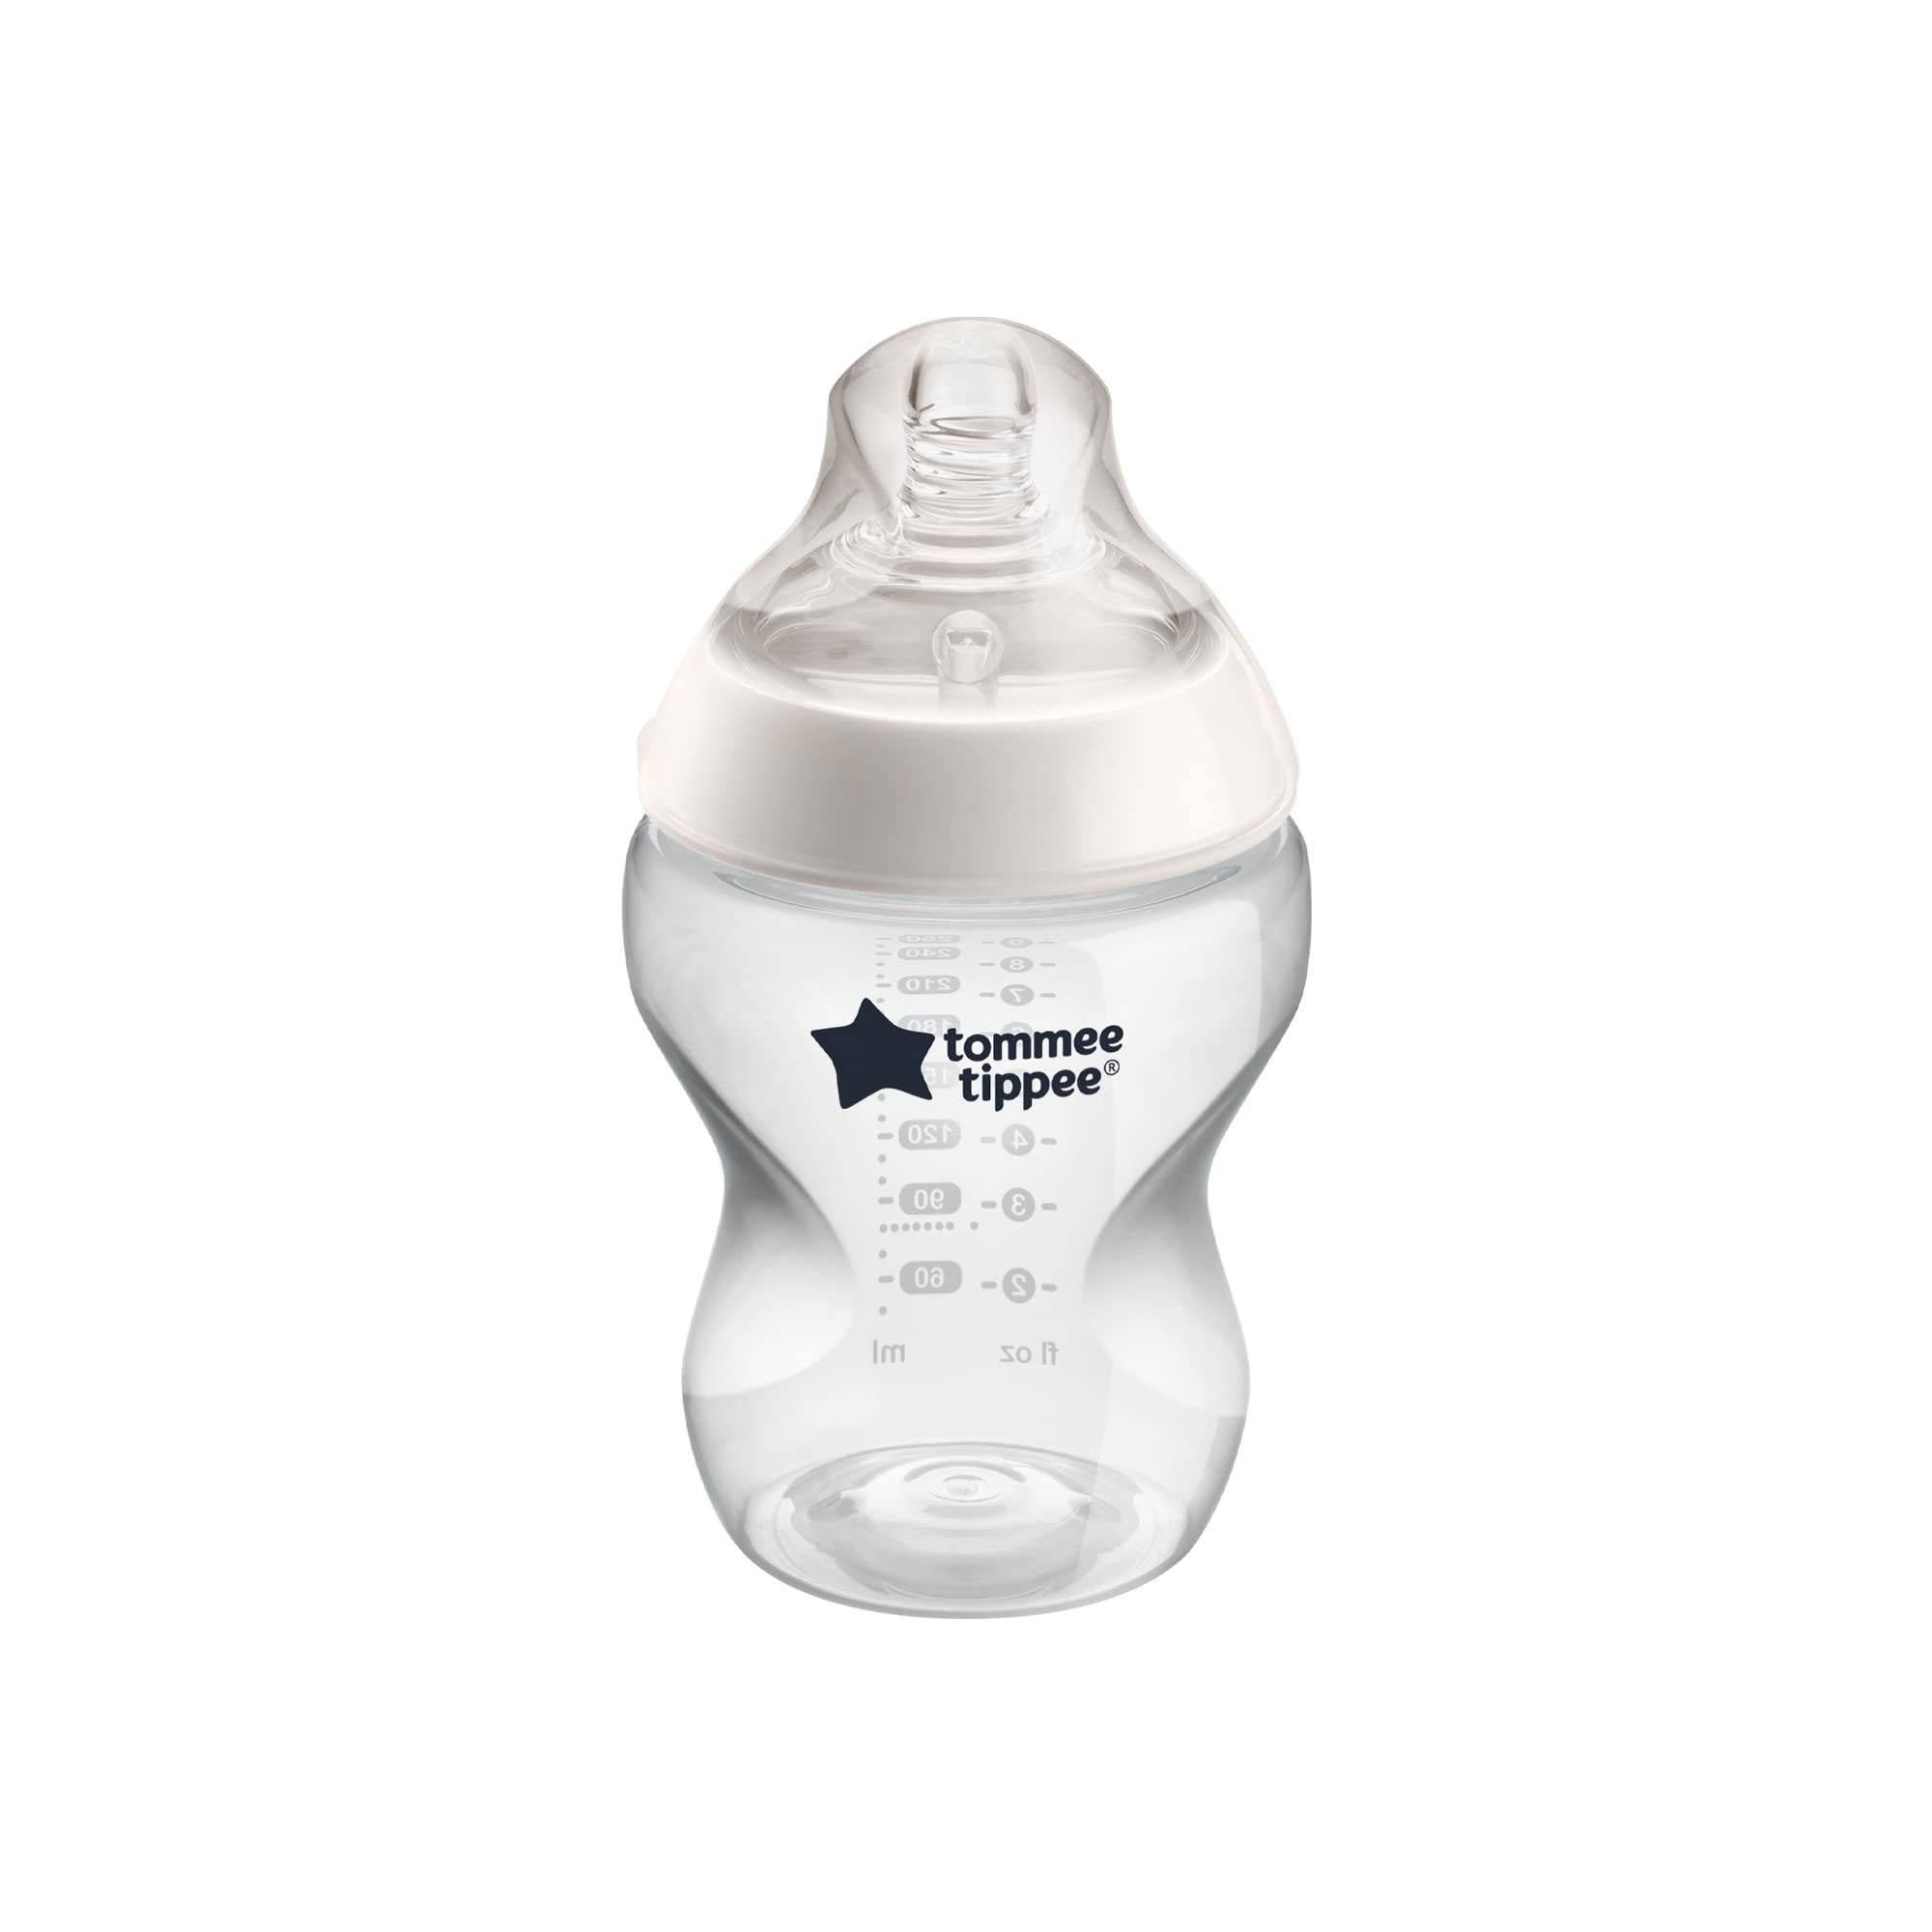 Tommee Tippee Anti-Colic Baby Bottles, Slow Flow Teat and Unique